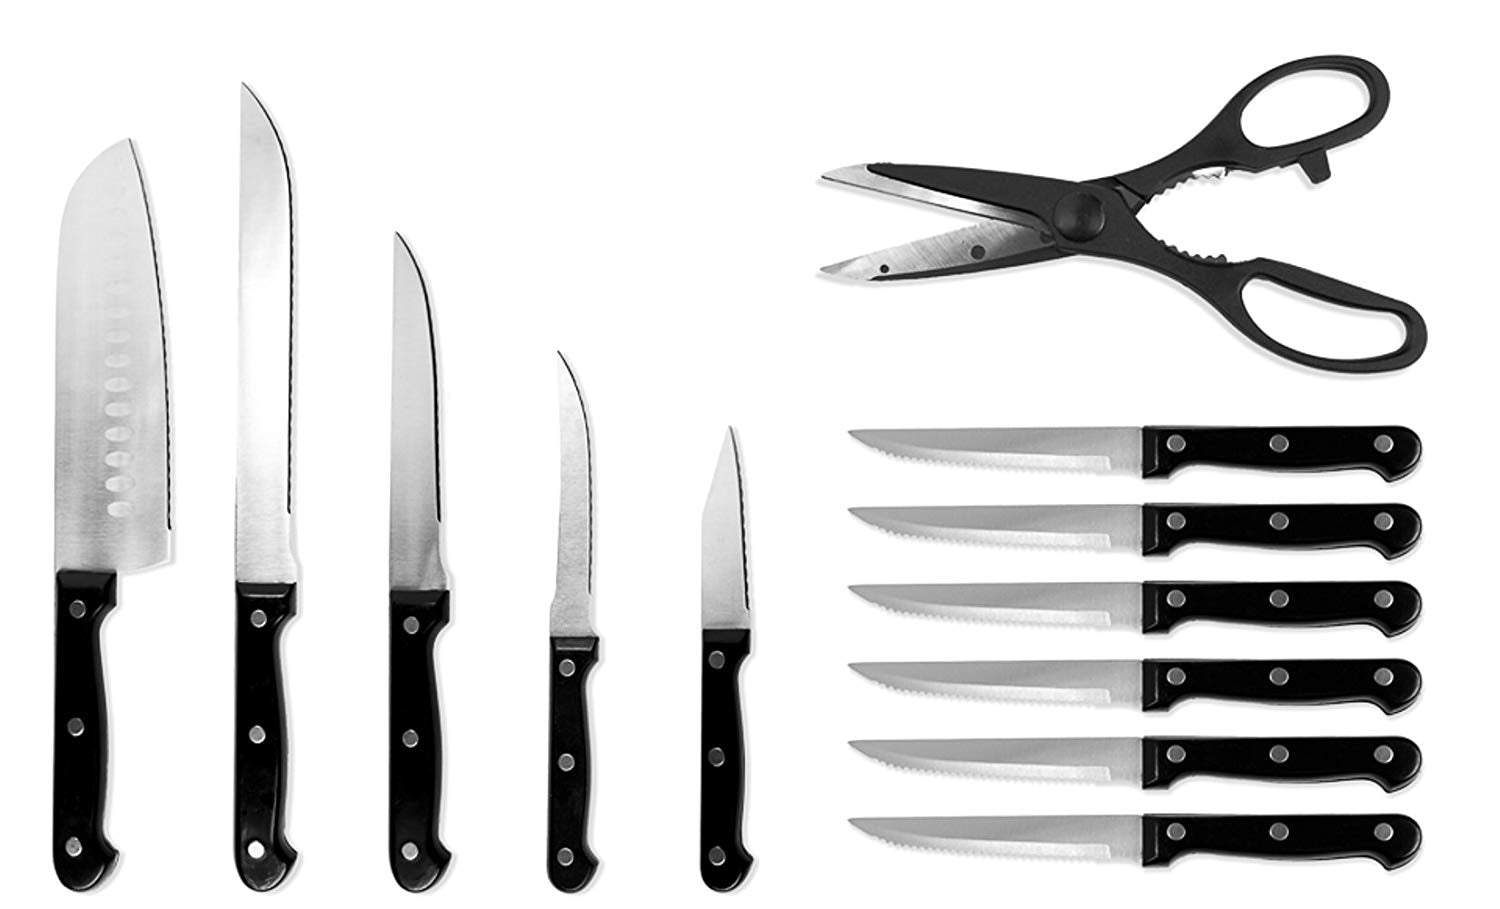 13 Pc Chef's Kitchen Knife Set w/Block - Stainless Steel Cutlery Sets - Cooking Knives